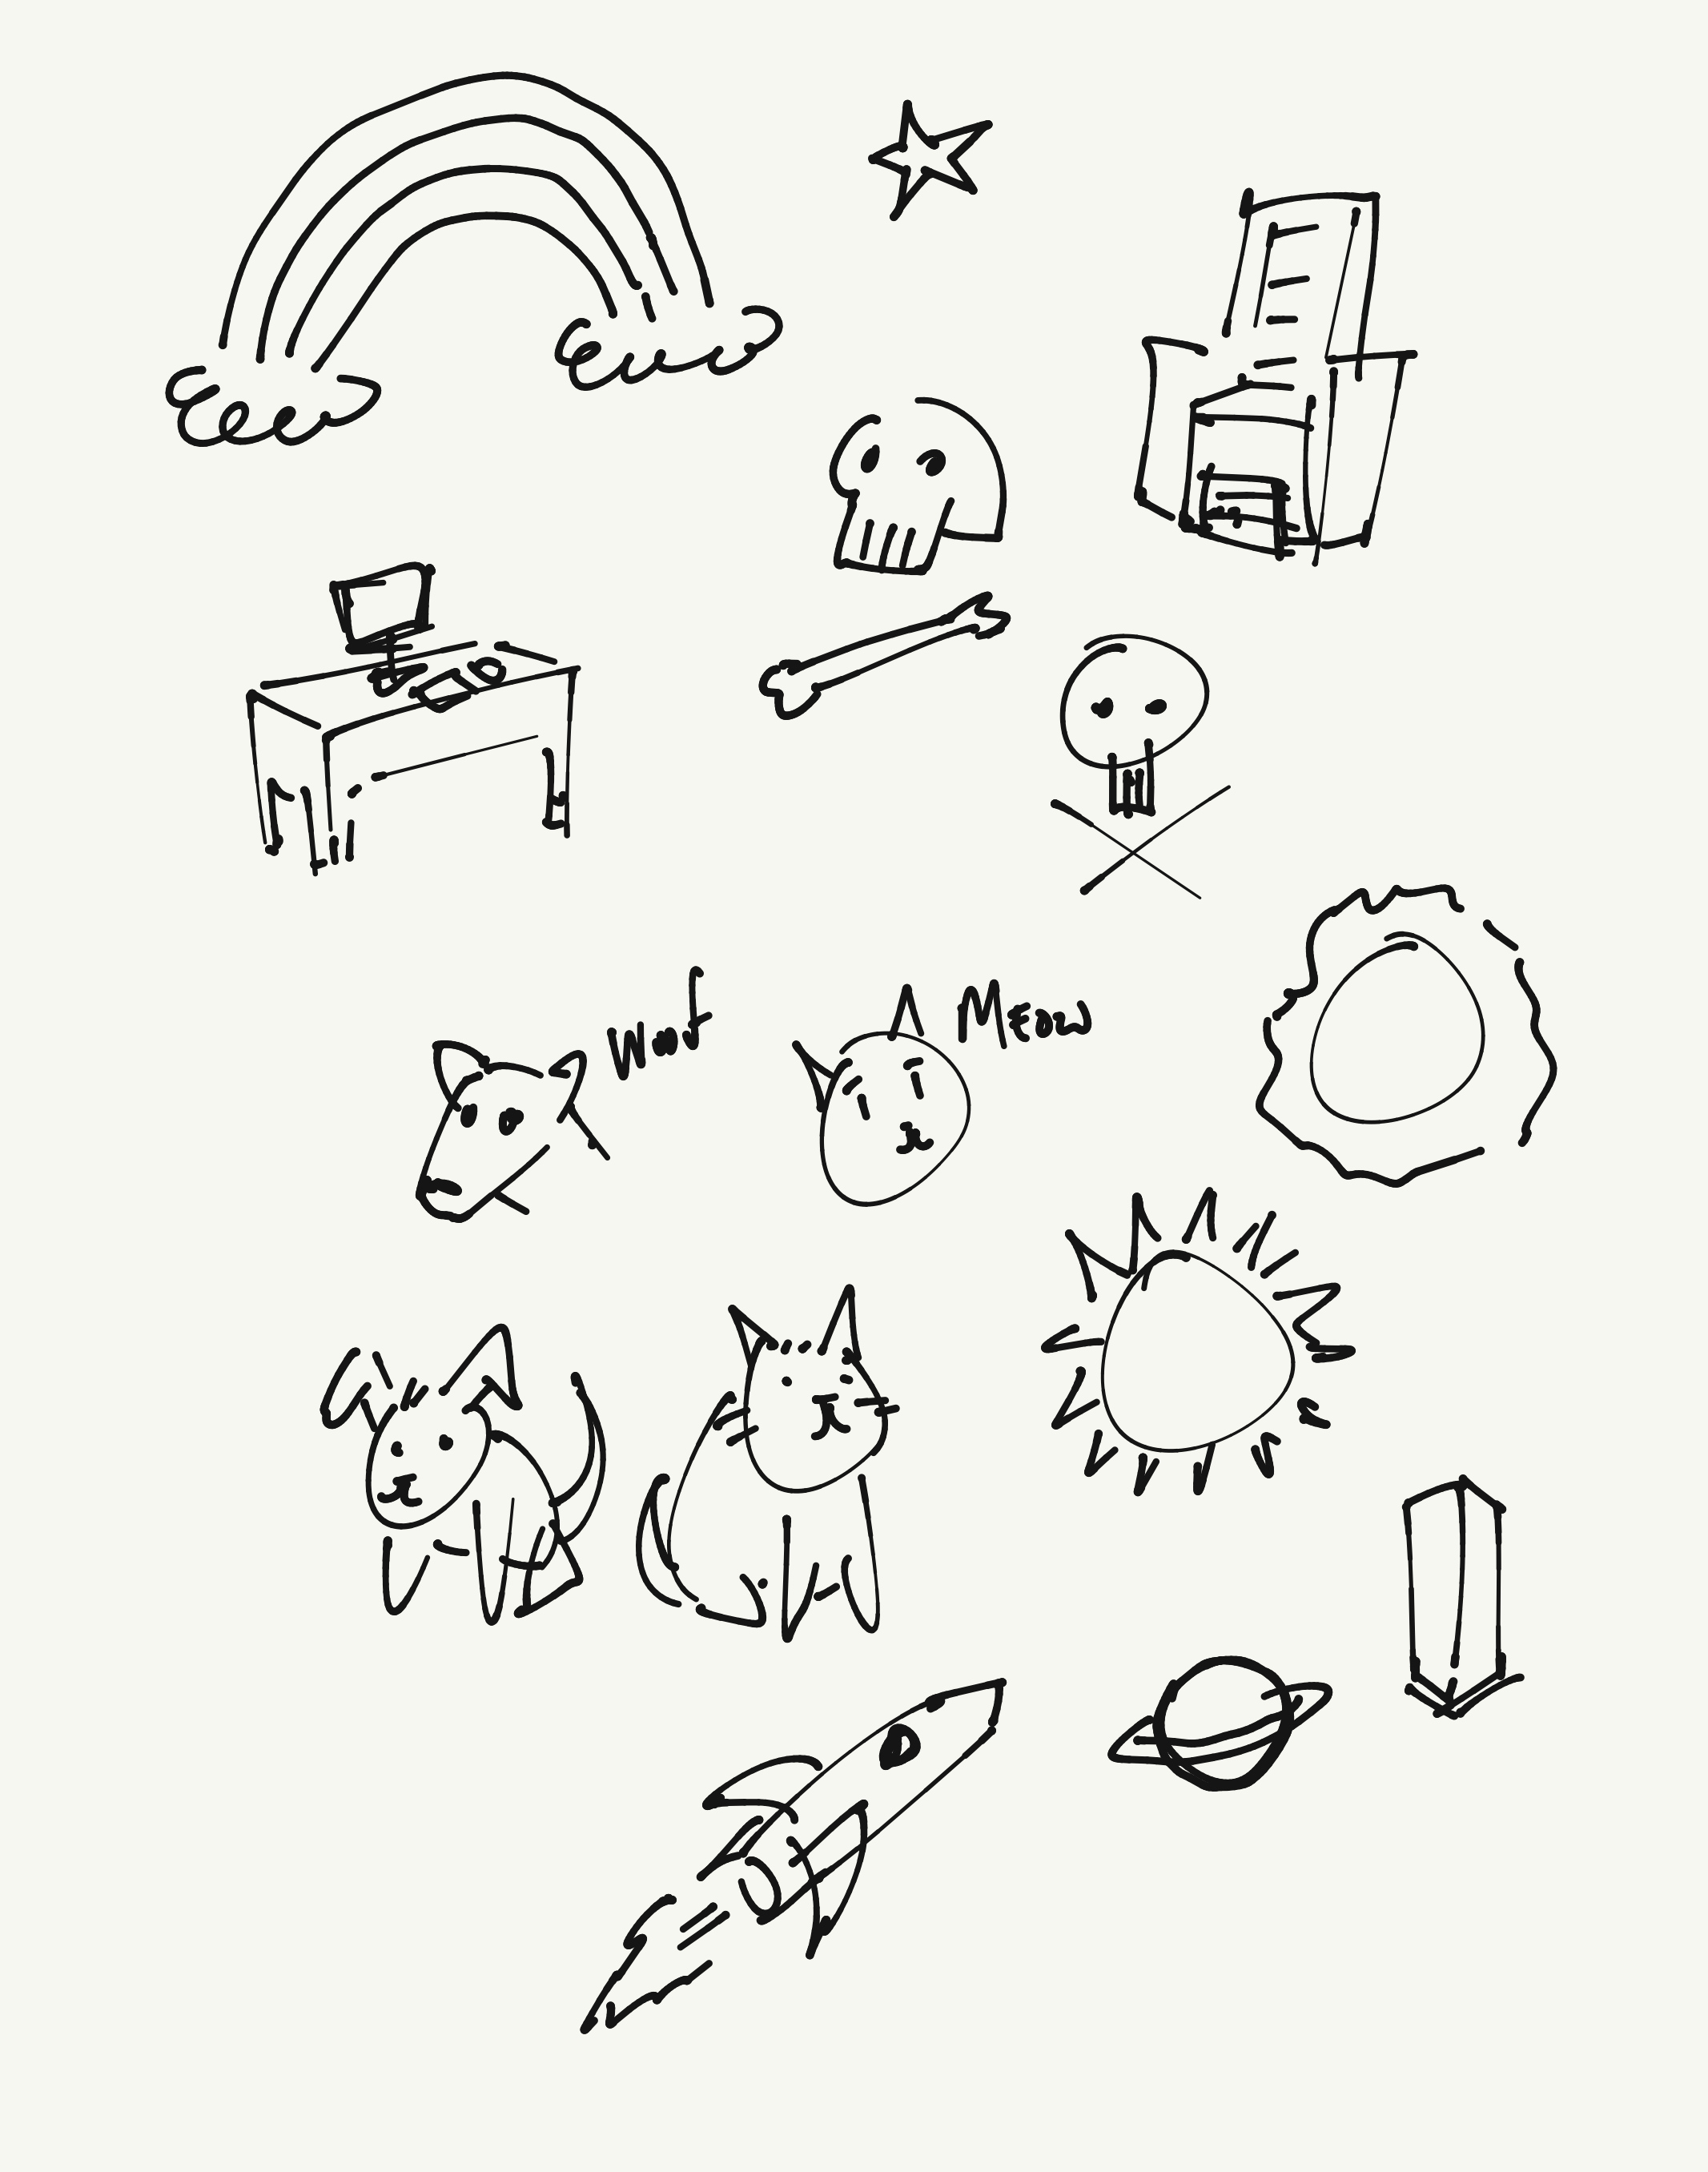 Doodle Catalog 3 - lots of sketches drawings quick visual storytelling note taking examples and ideas 5.png